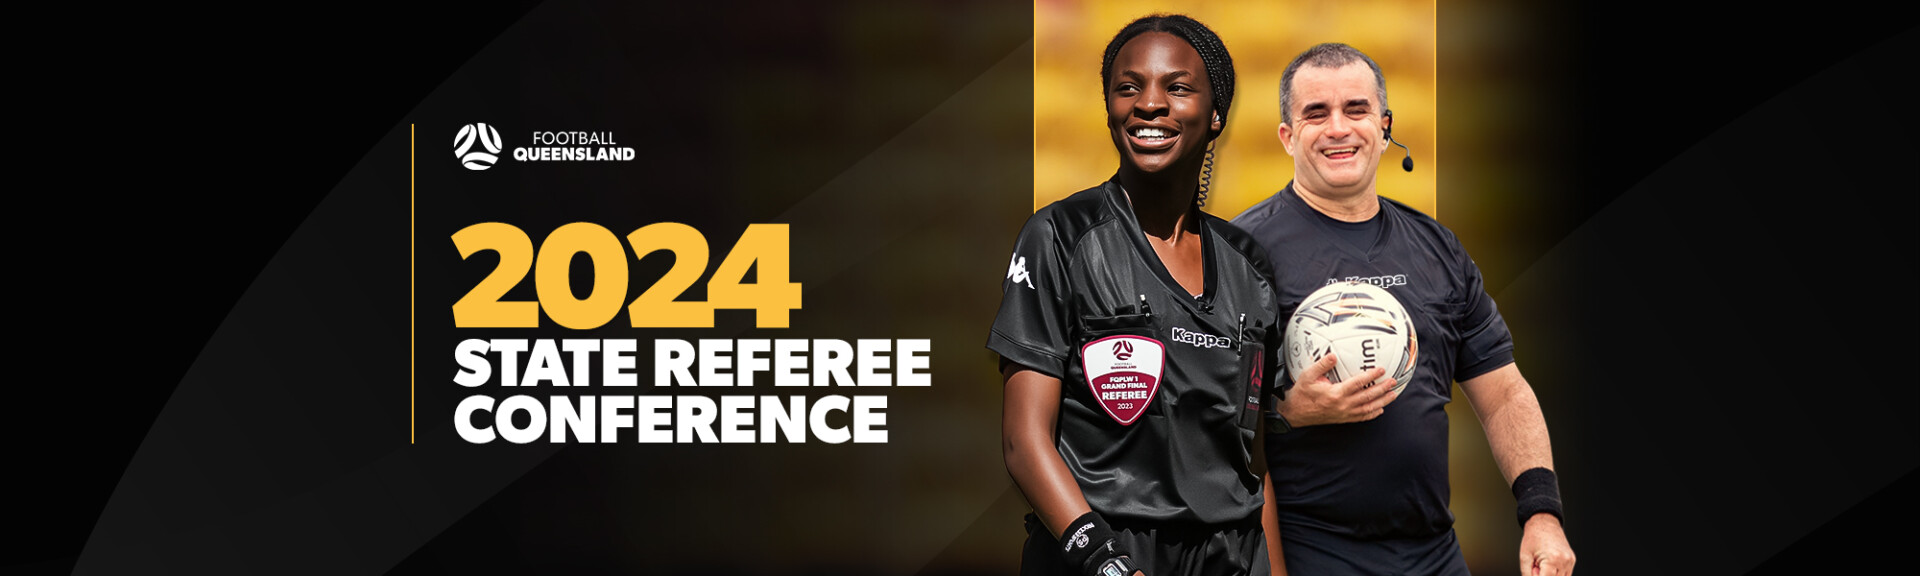 2310001 Referees 2024 State Referee Conference Launch Web 2000x600 2 